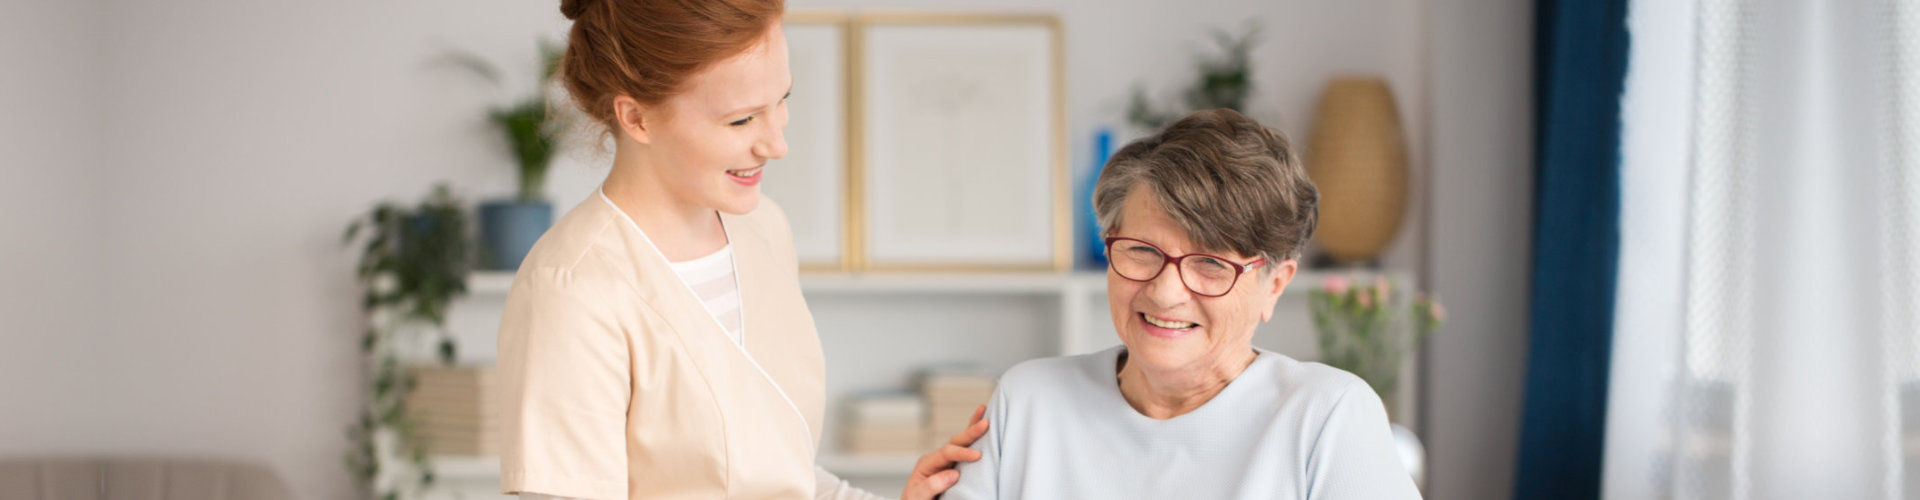 lady caregiver with senior people smiling